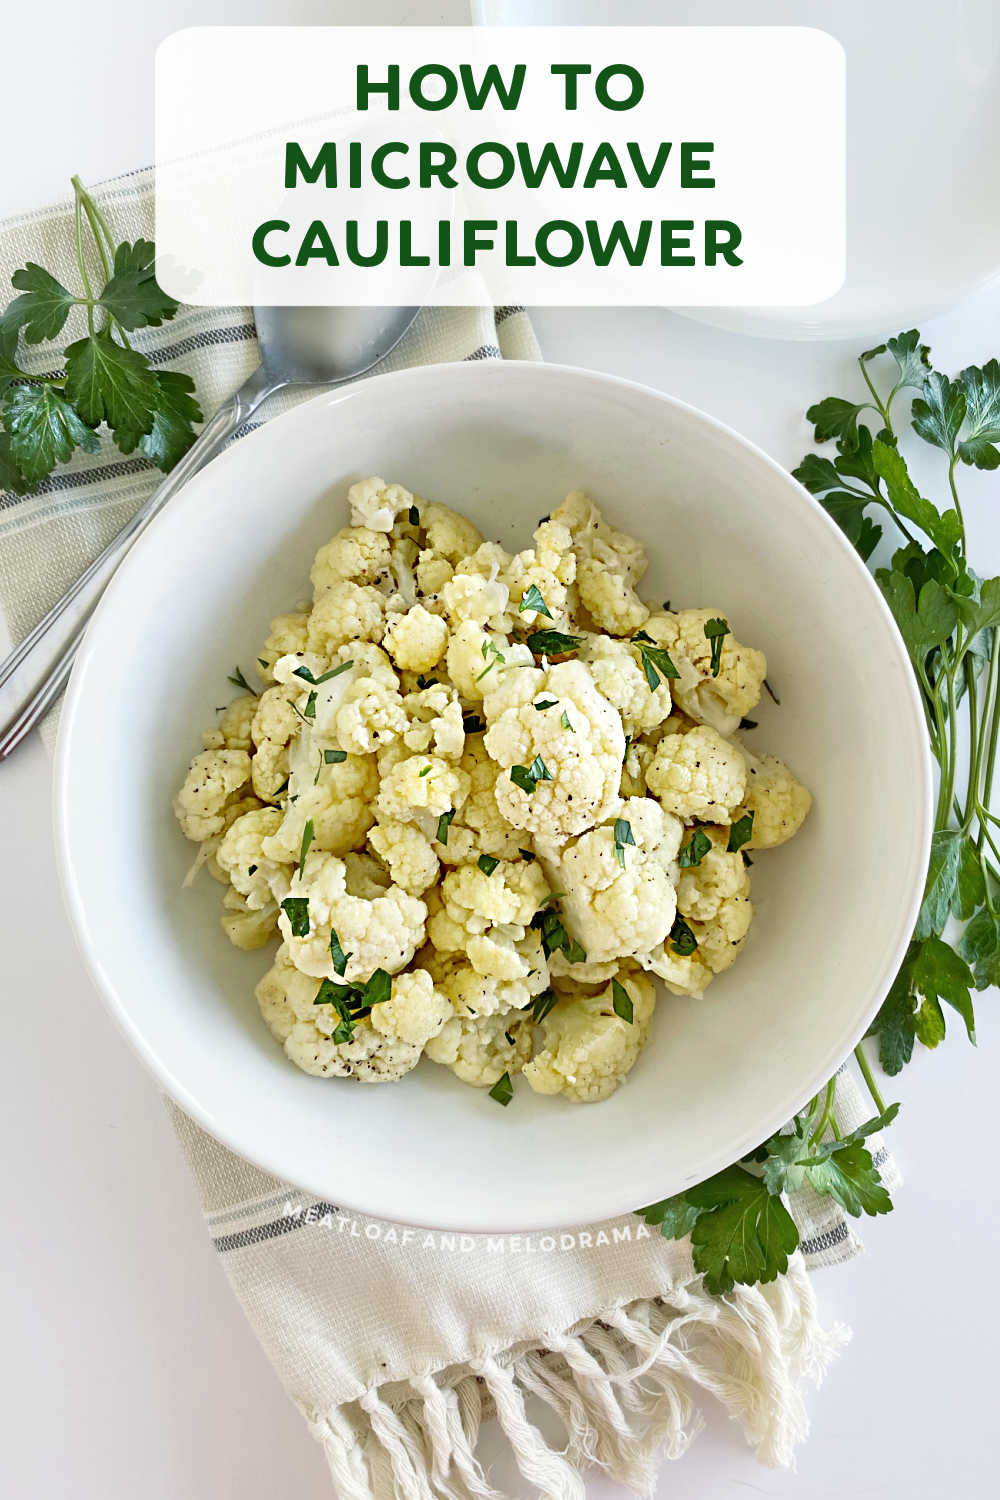 Microwave cauliflower with butter, salt, pepper and garlic for a healthy low carb side dish. Learn how to steam cauliflower in the microwave in just a few minutes with this easy recipe! It's fork tender and delicious! via @meamel